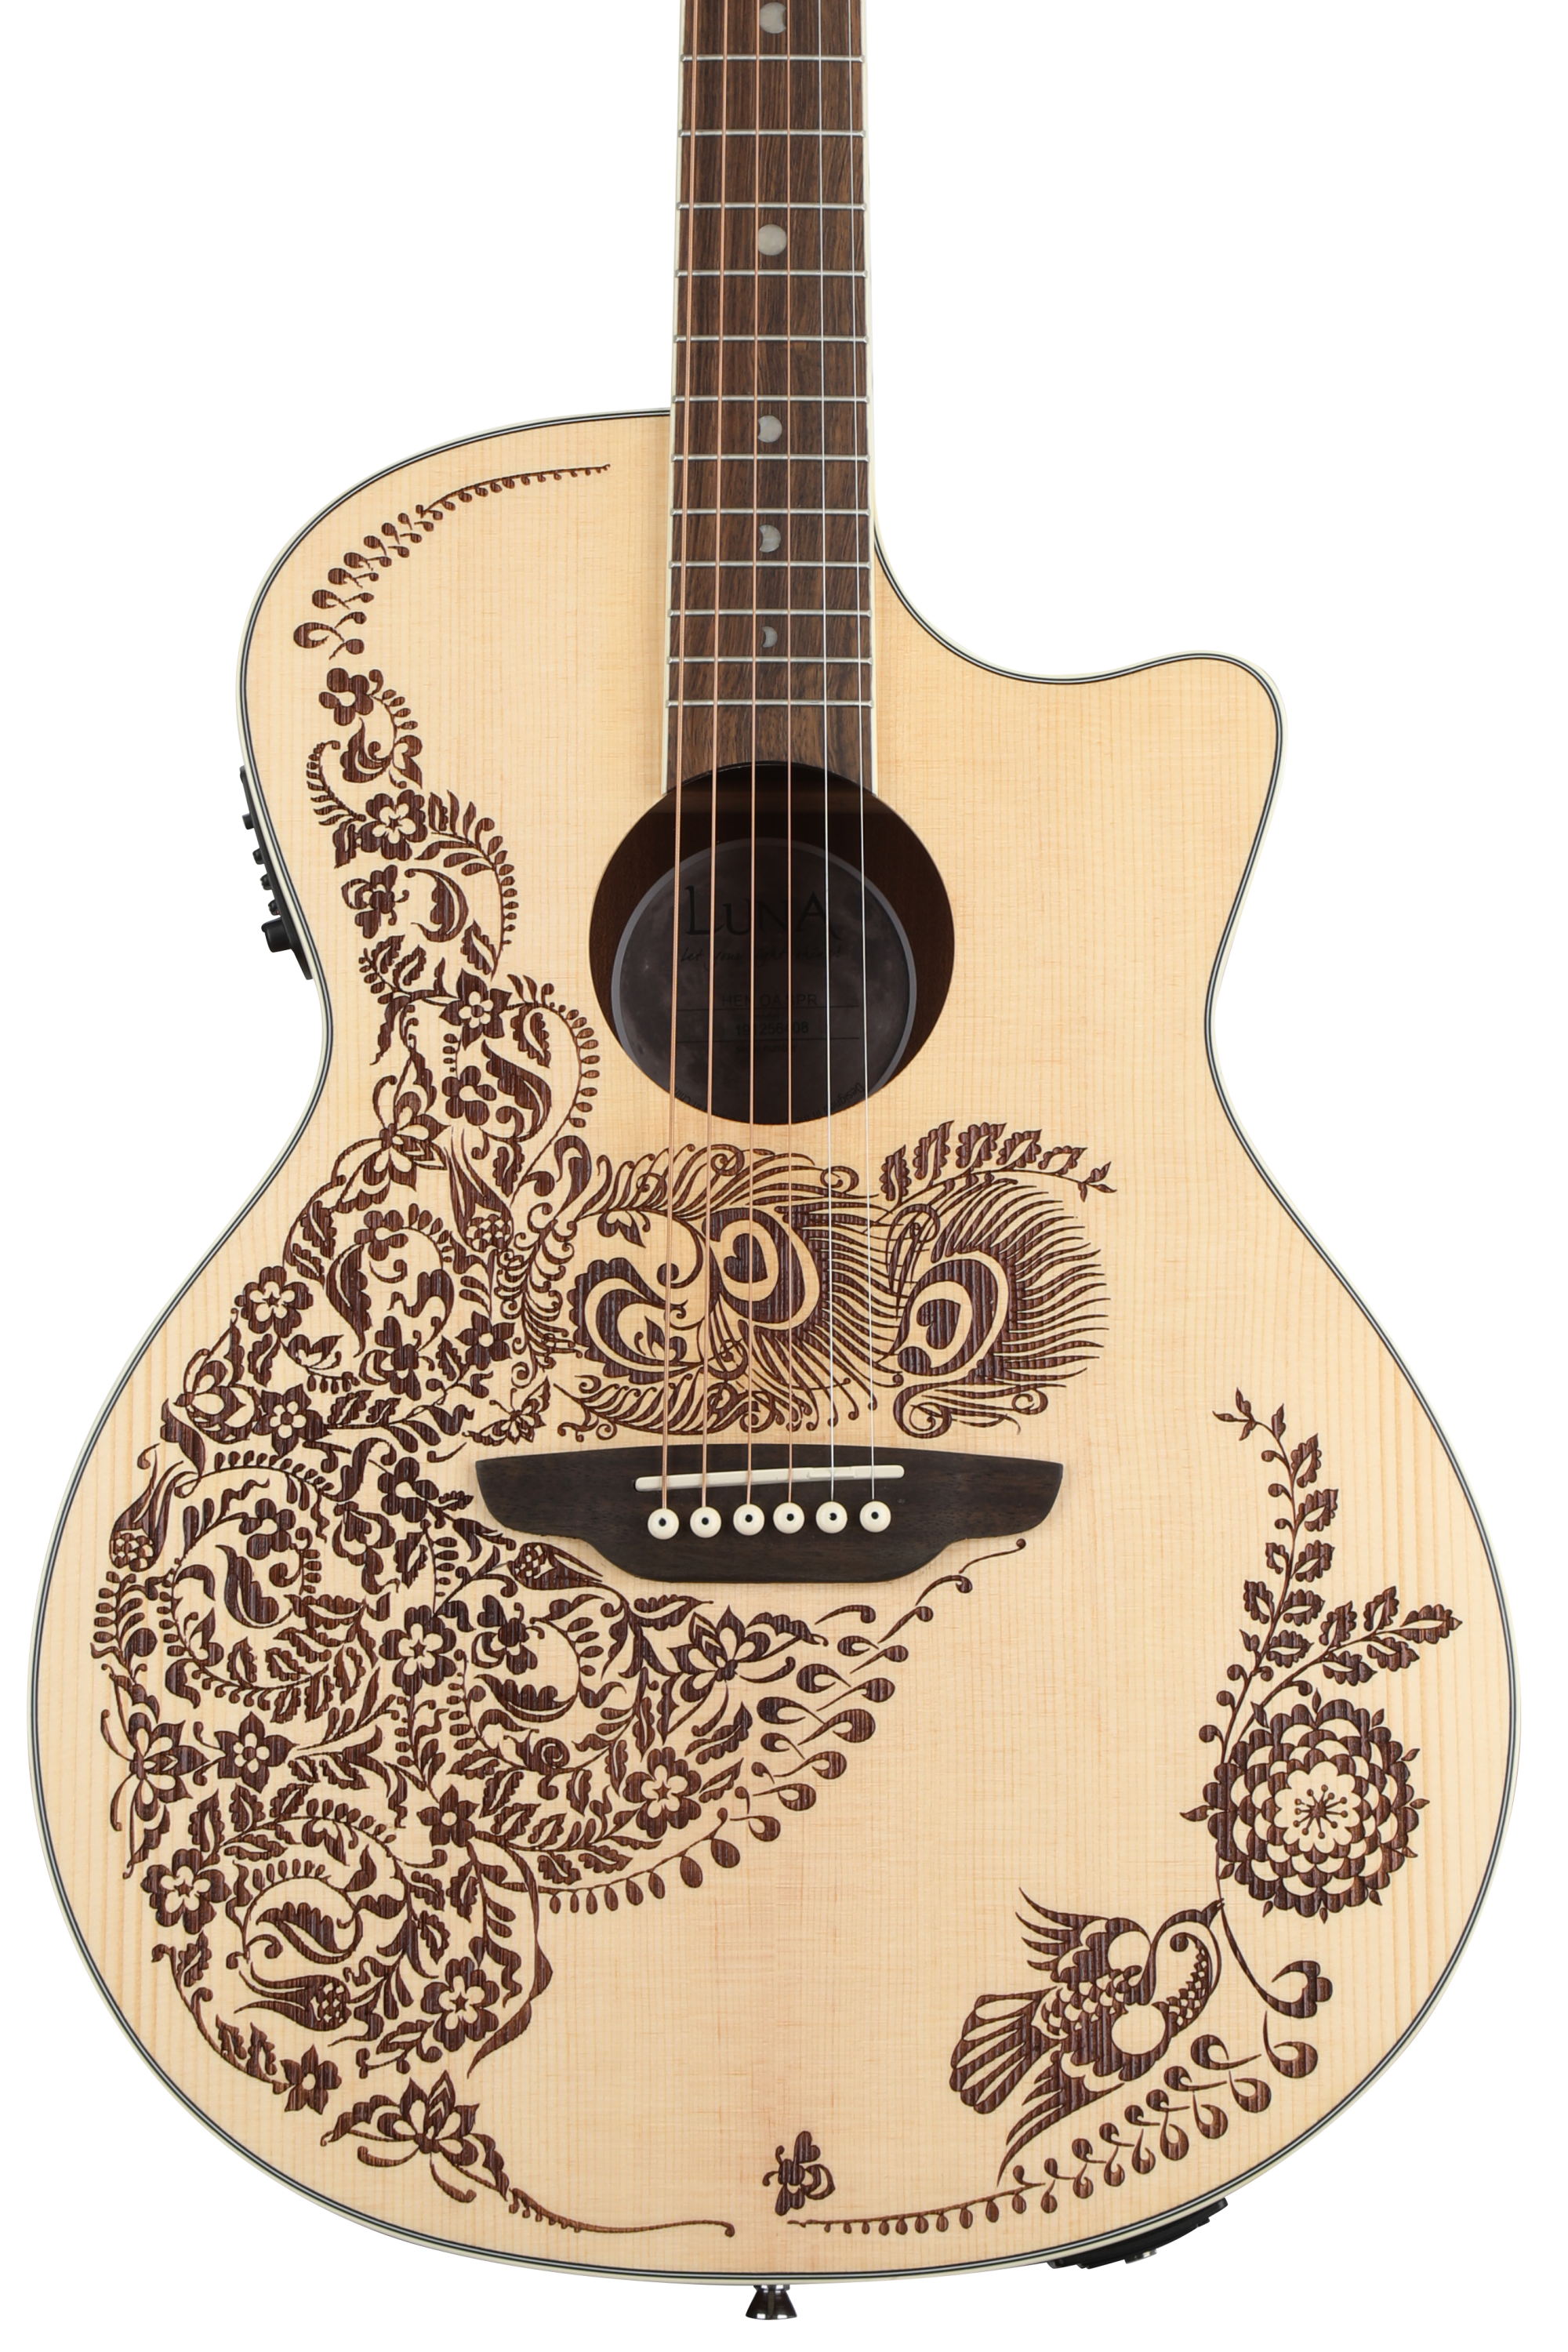 Luminans brysomme smertefuld Luna Henna Oasis Acoustic-electric Guitar - Open Pore Natural | Sweetwater